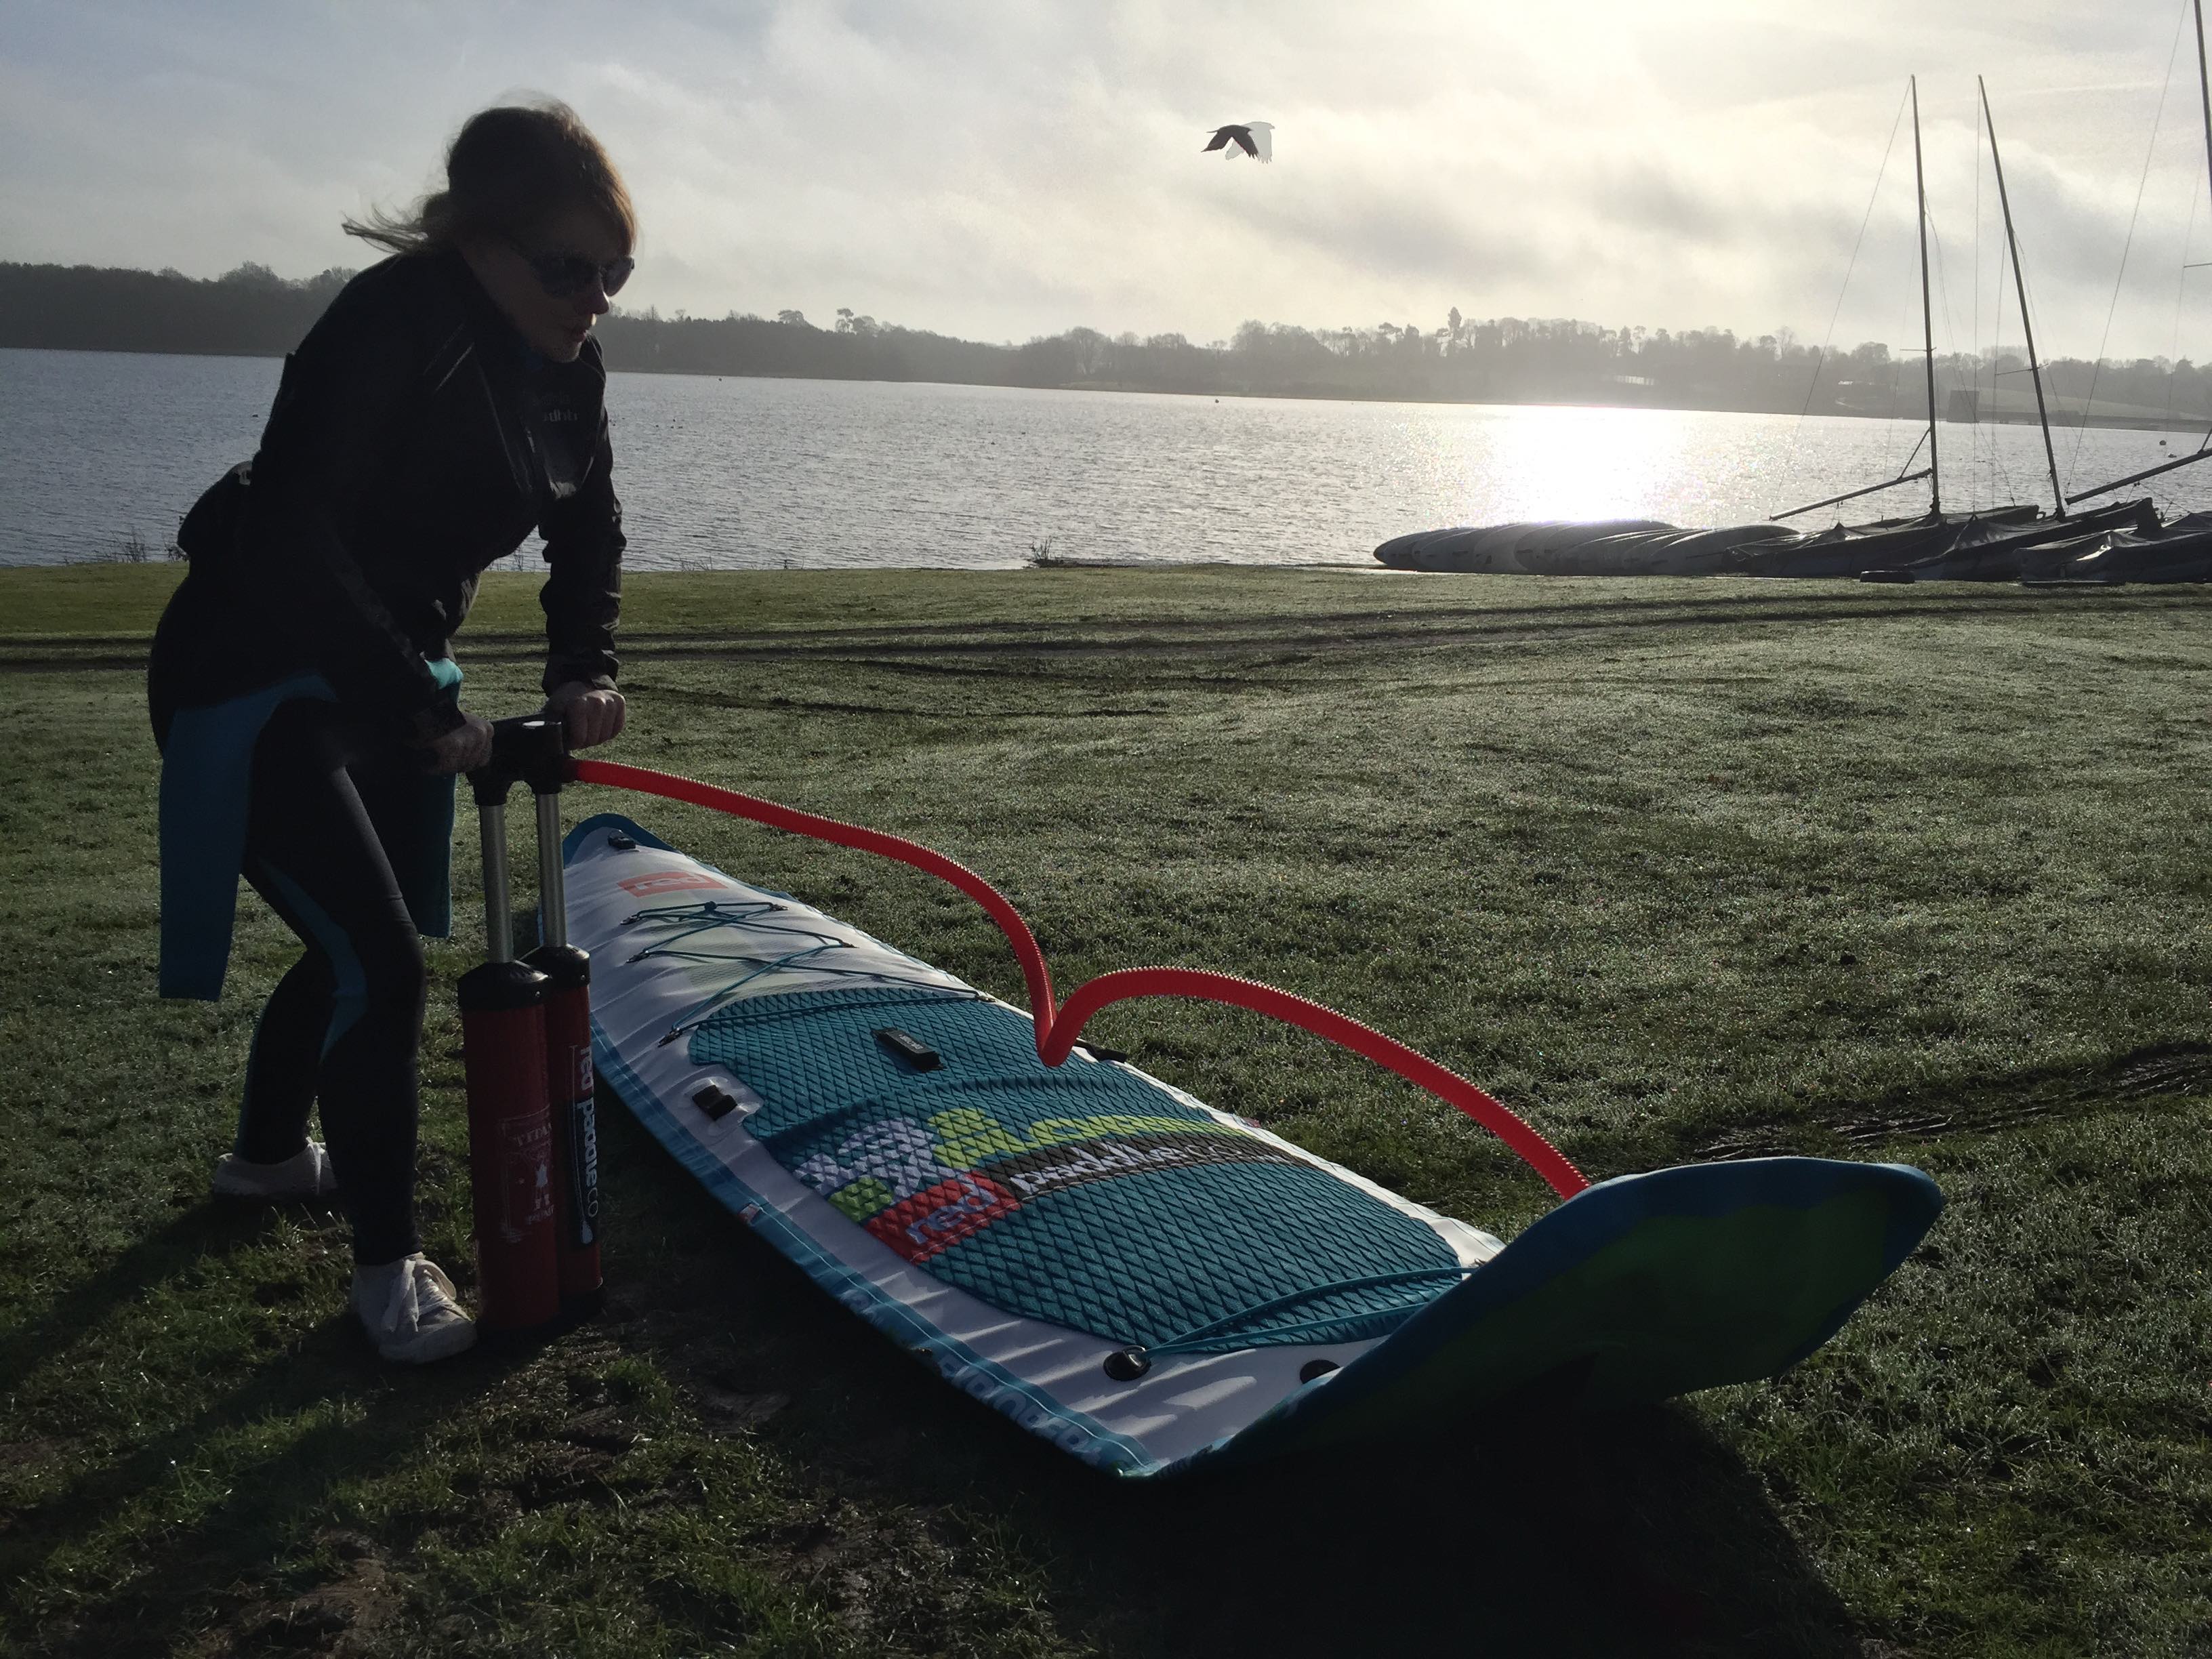 Adrianne Hill trying out her Red Paddle Explorer 13'2"